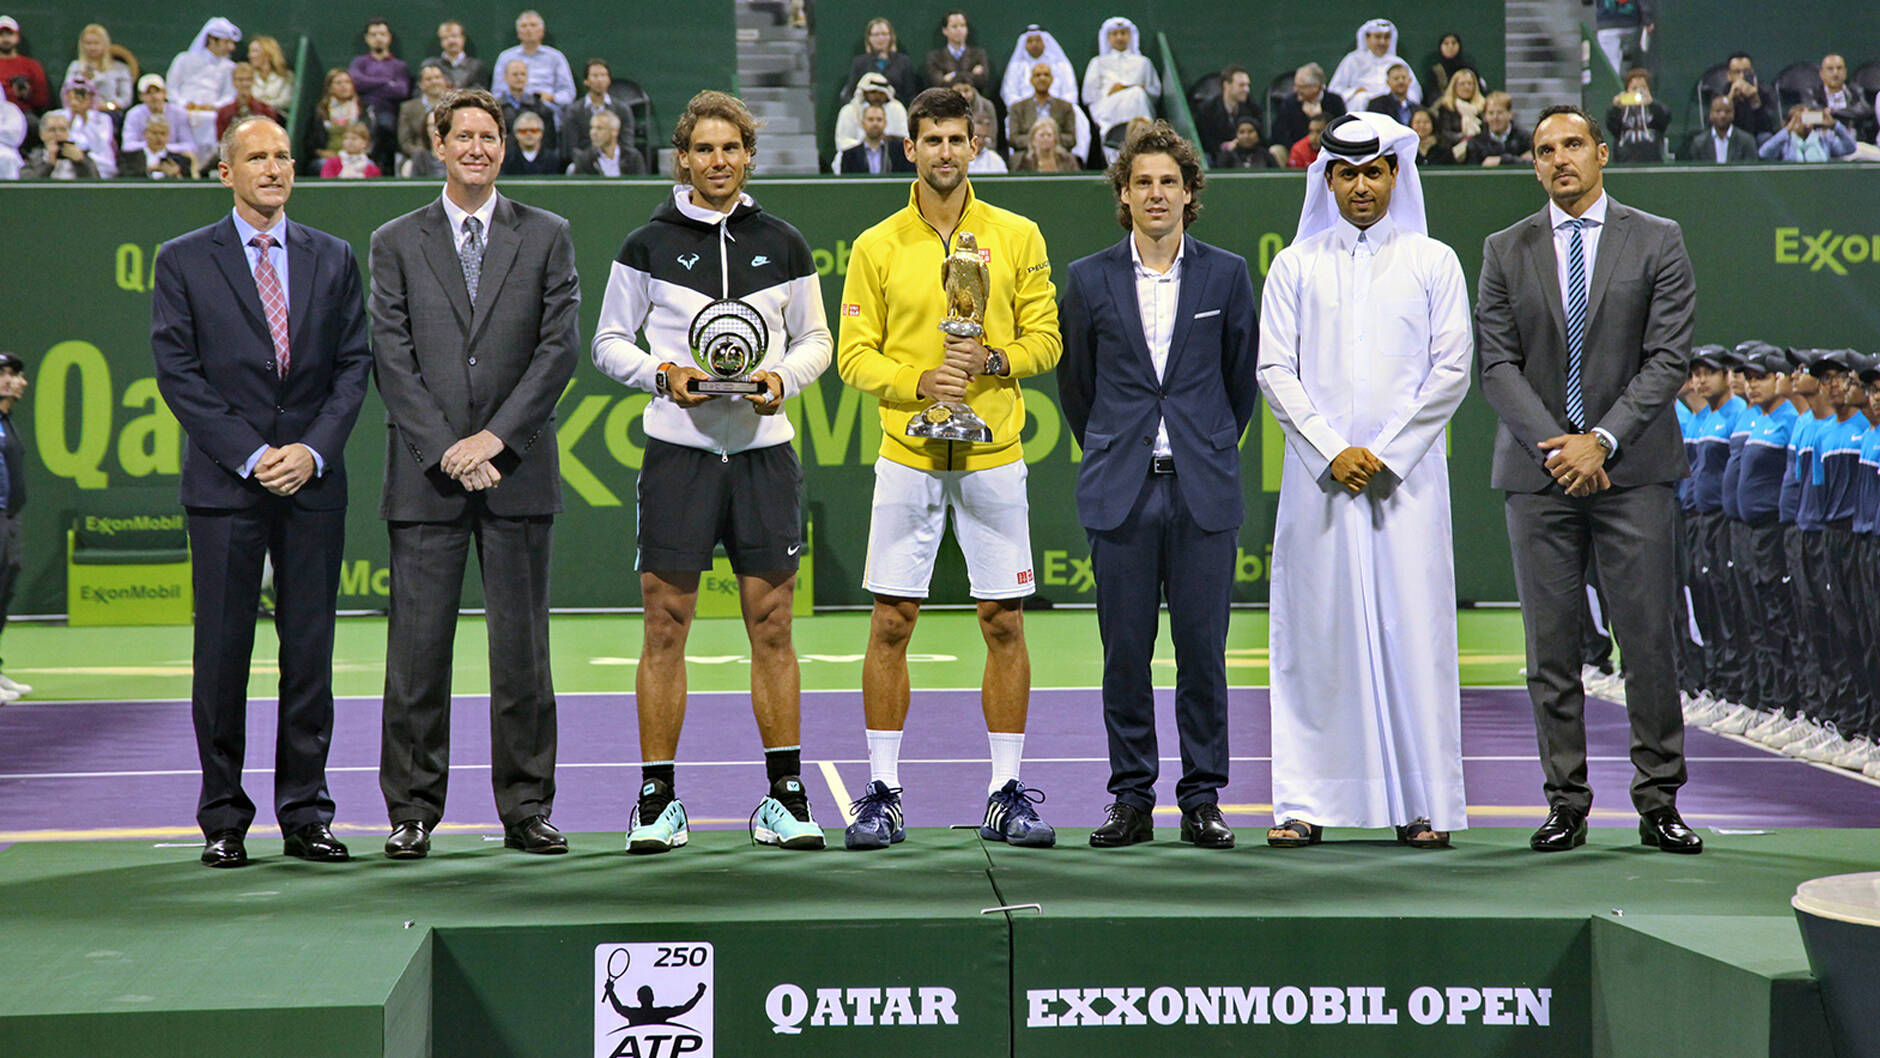 Qatar ExxonMobil Open 2016 champion Novak Djokovic of Serbia and second-place finisher Rafael Nadal of Spain with Alistair Routledge, President and General Manager for ExxonMobil Qatar; Andrew P. Swiger, Senior Vice President of Exxon Mobil Corporation; H.E. Nasser Al-Khelaifi, President of Qatar Tennis Federation and other dignitaries at the prize giving ceremony.